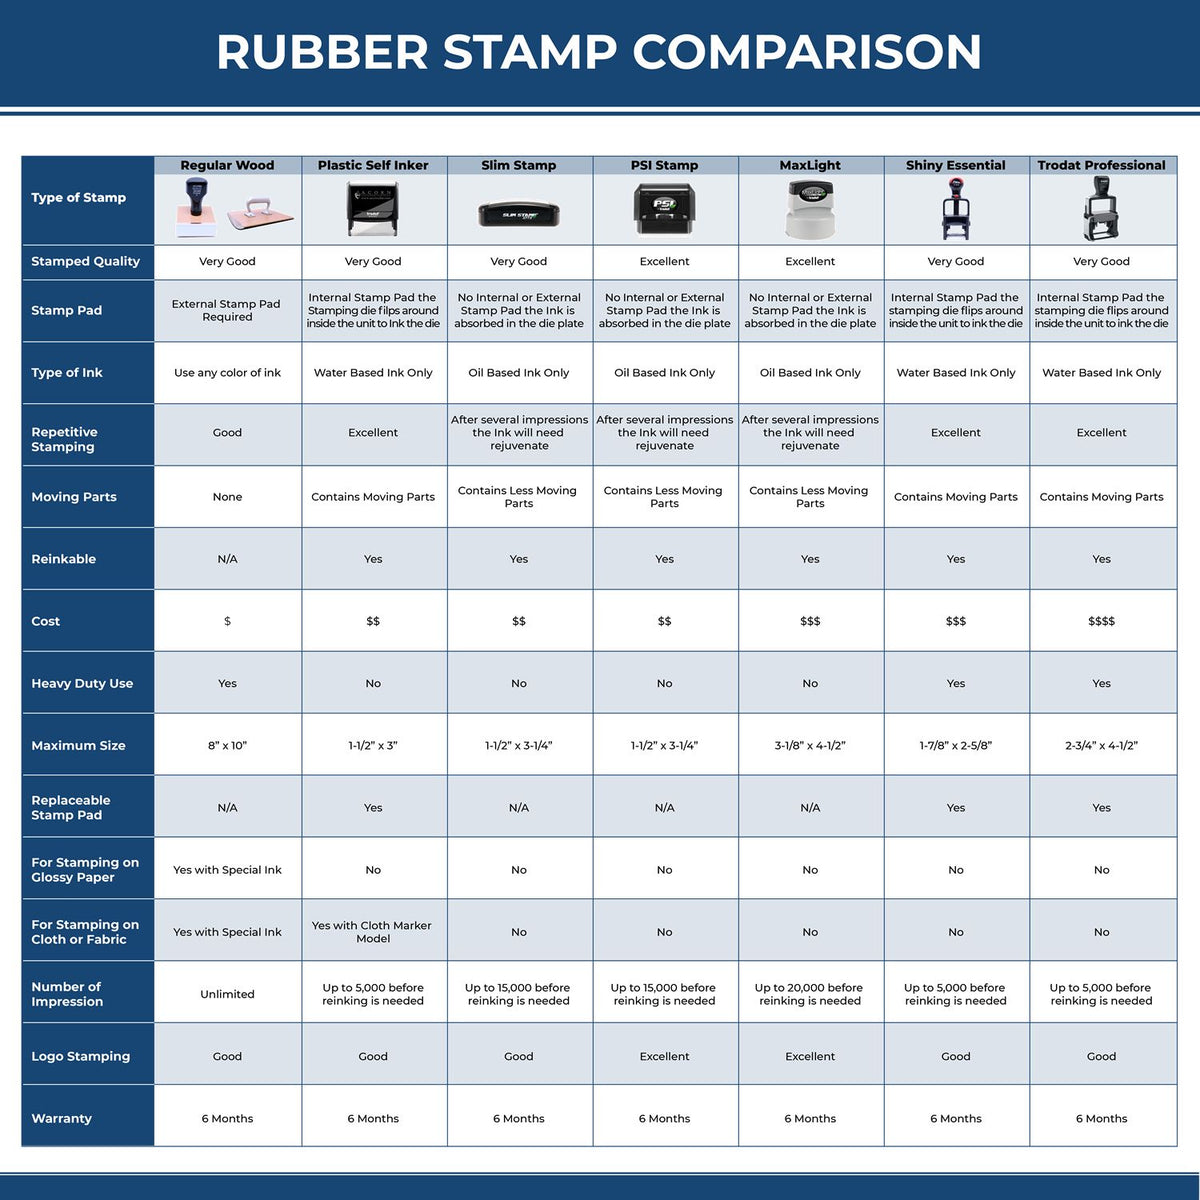 A comparison chart for the different types of mount models available for the Premium MaxLight Pre-Inked Arizona Engineering Stamp.